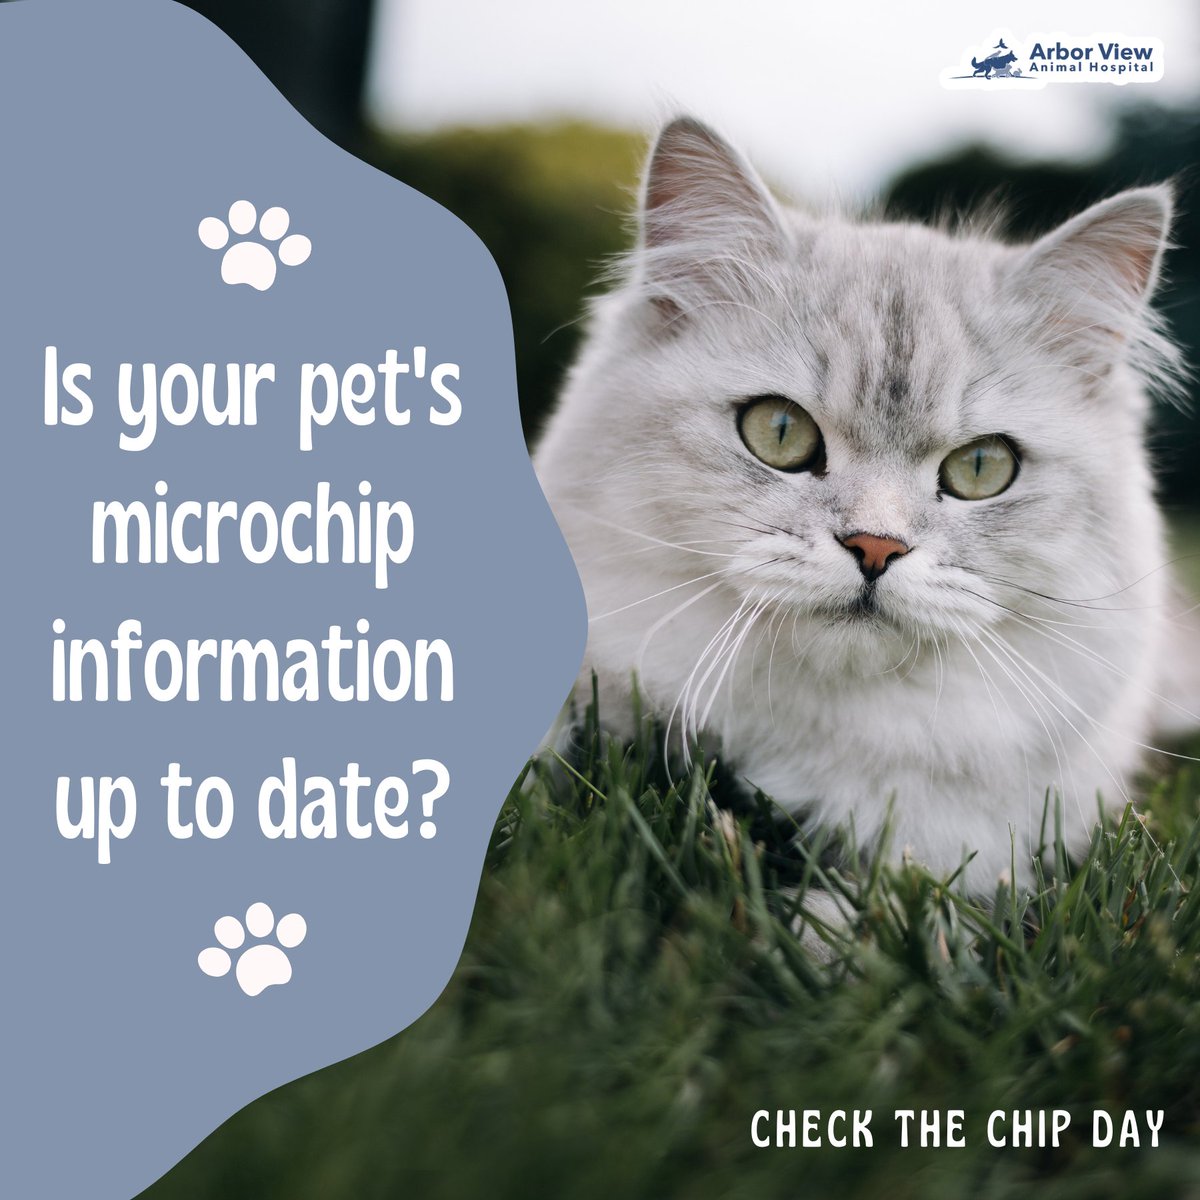 Show your pet some love today by getting them microchipped for #NationalChecktheChipDay! Microchipping is a safe and permanent way to identify your pet in case they ever get lost - don't forget to keep your contact info updated. 🐾 #PetMicrochipping